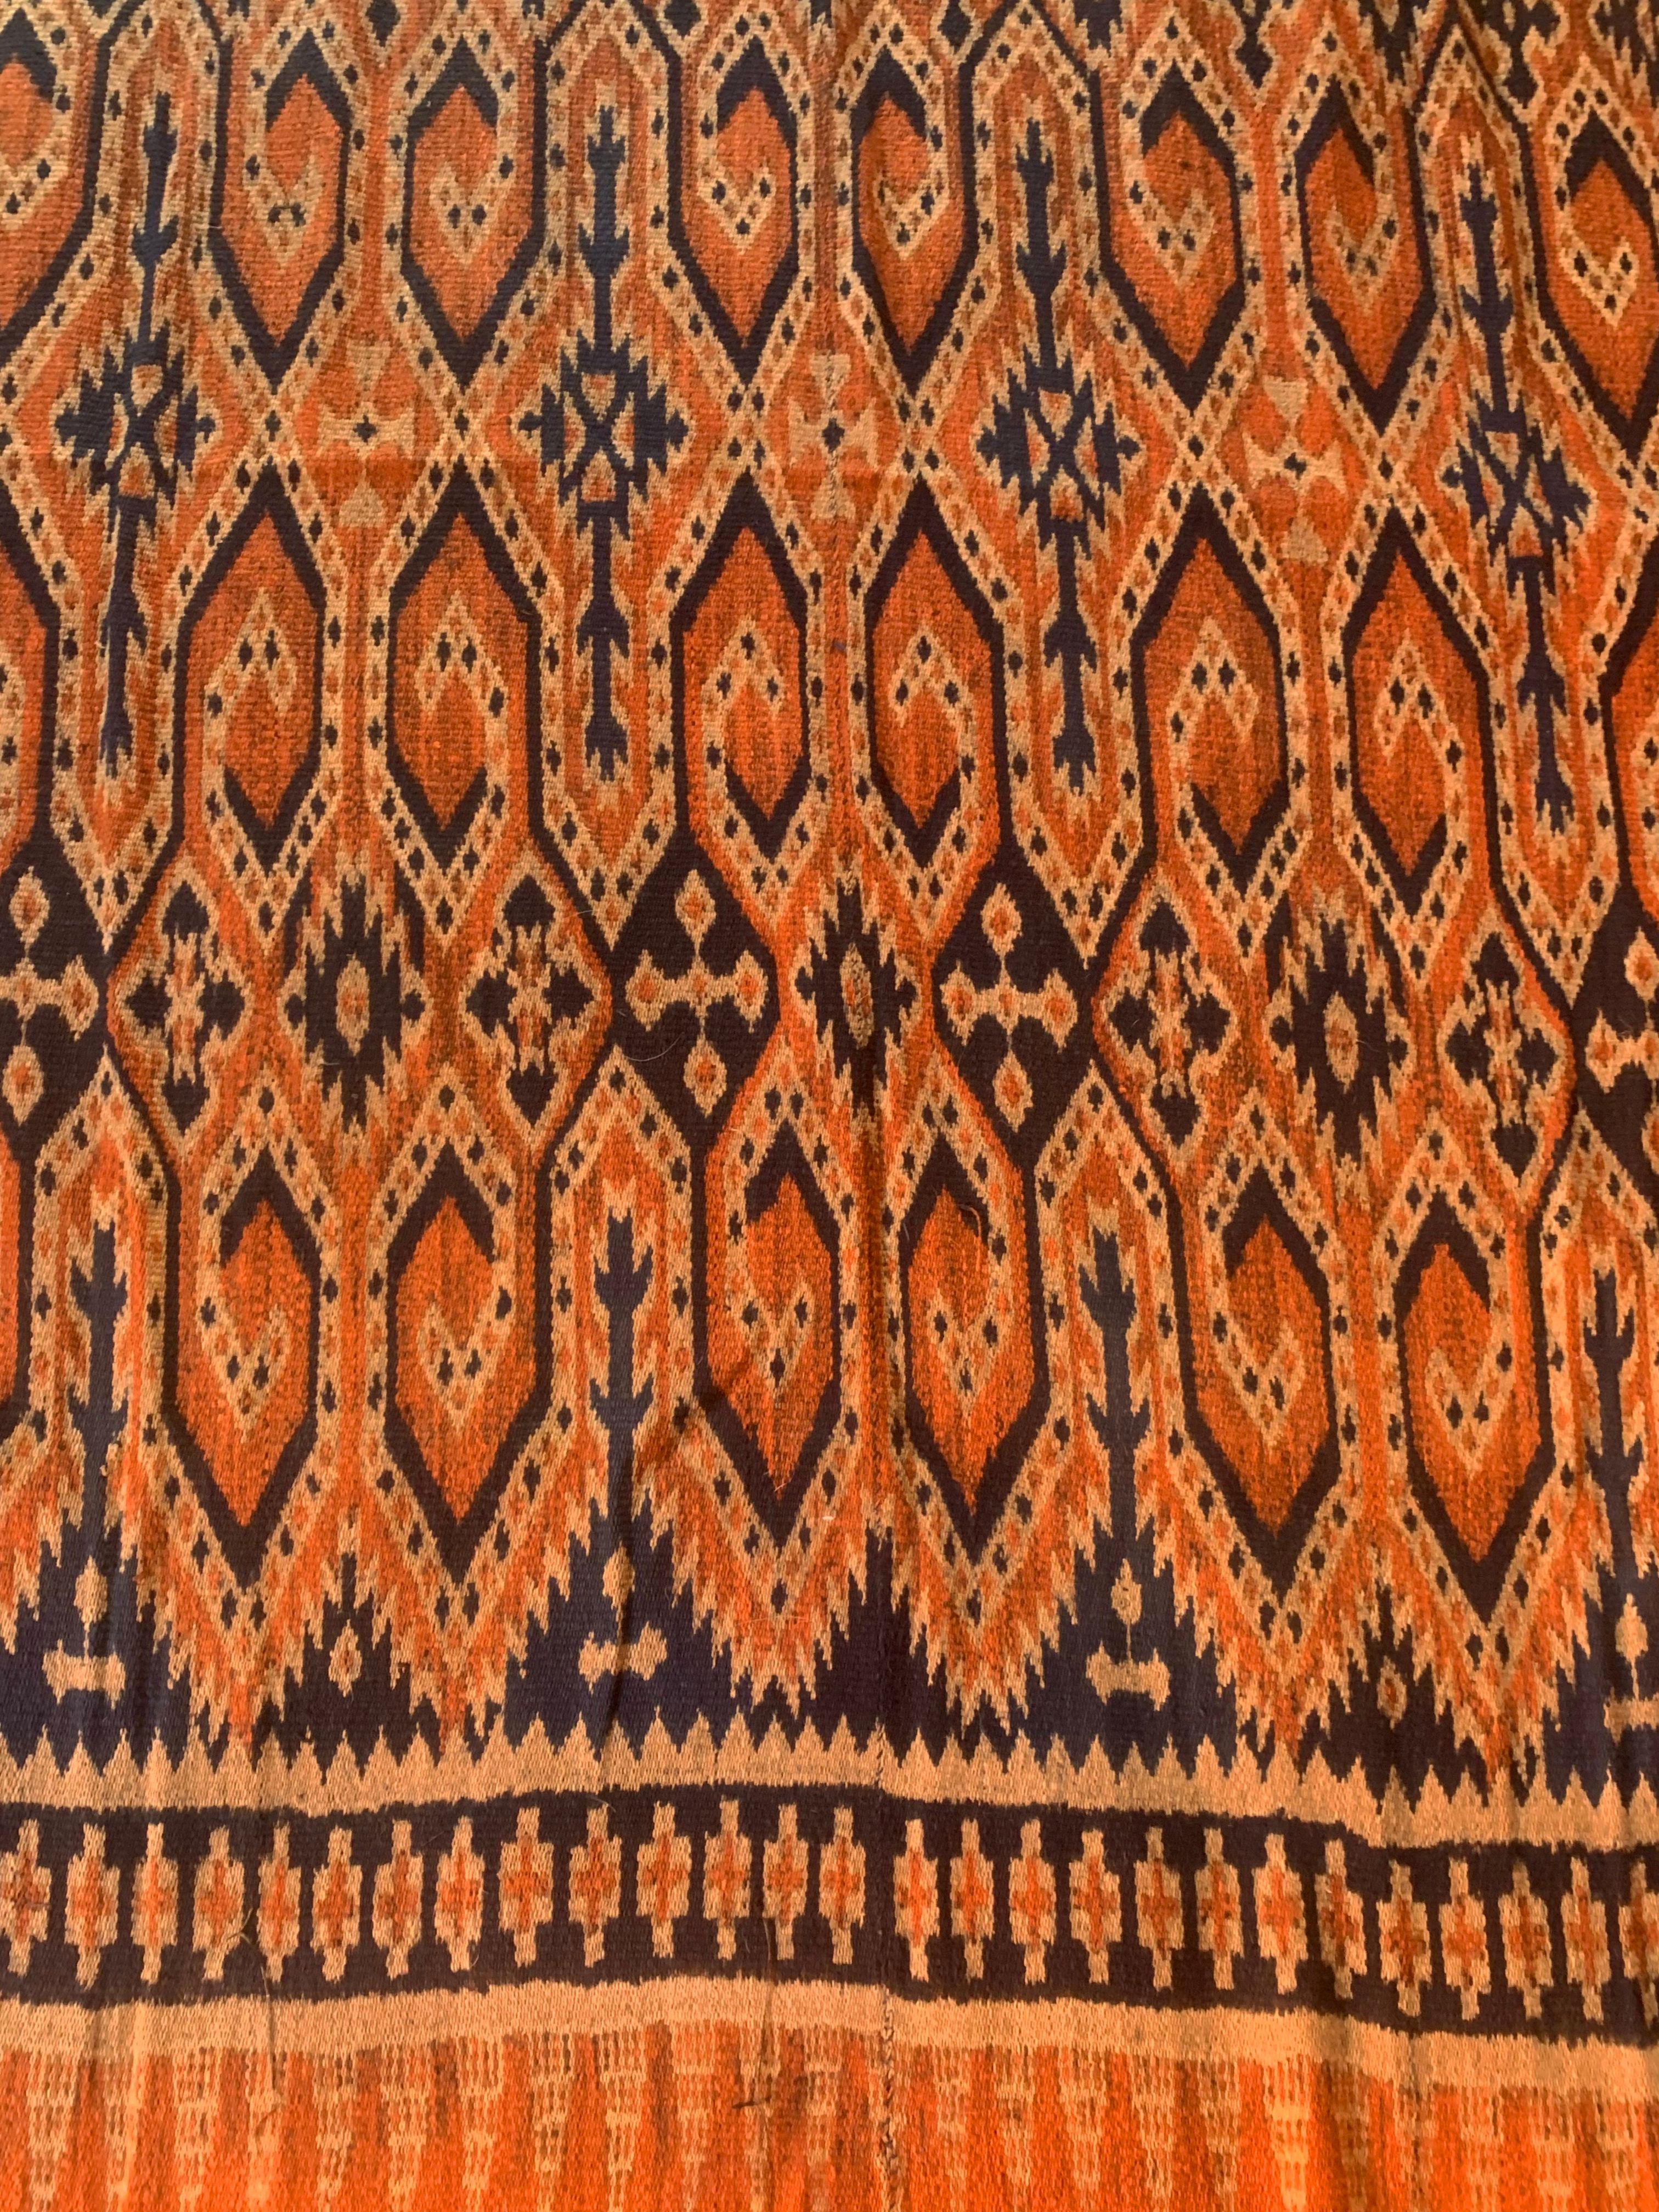 Other Ikat Textile from Toraja Tribe of Sulawesi with Stunning Tribal Motifs C. 1950 For Sale